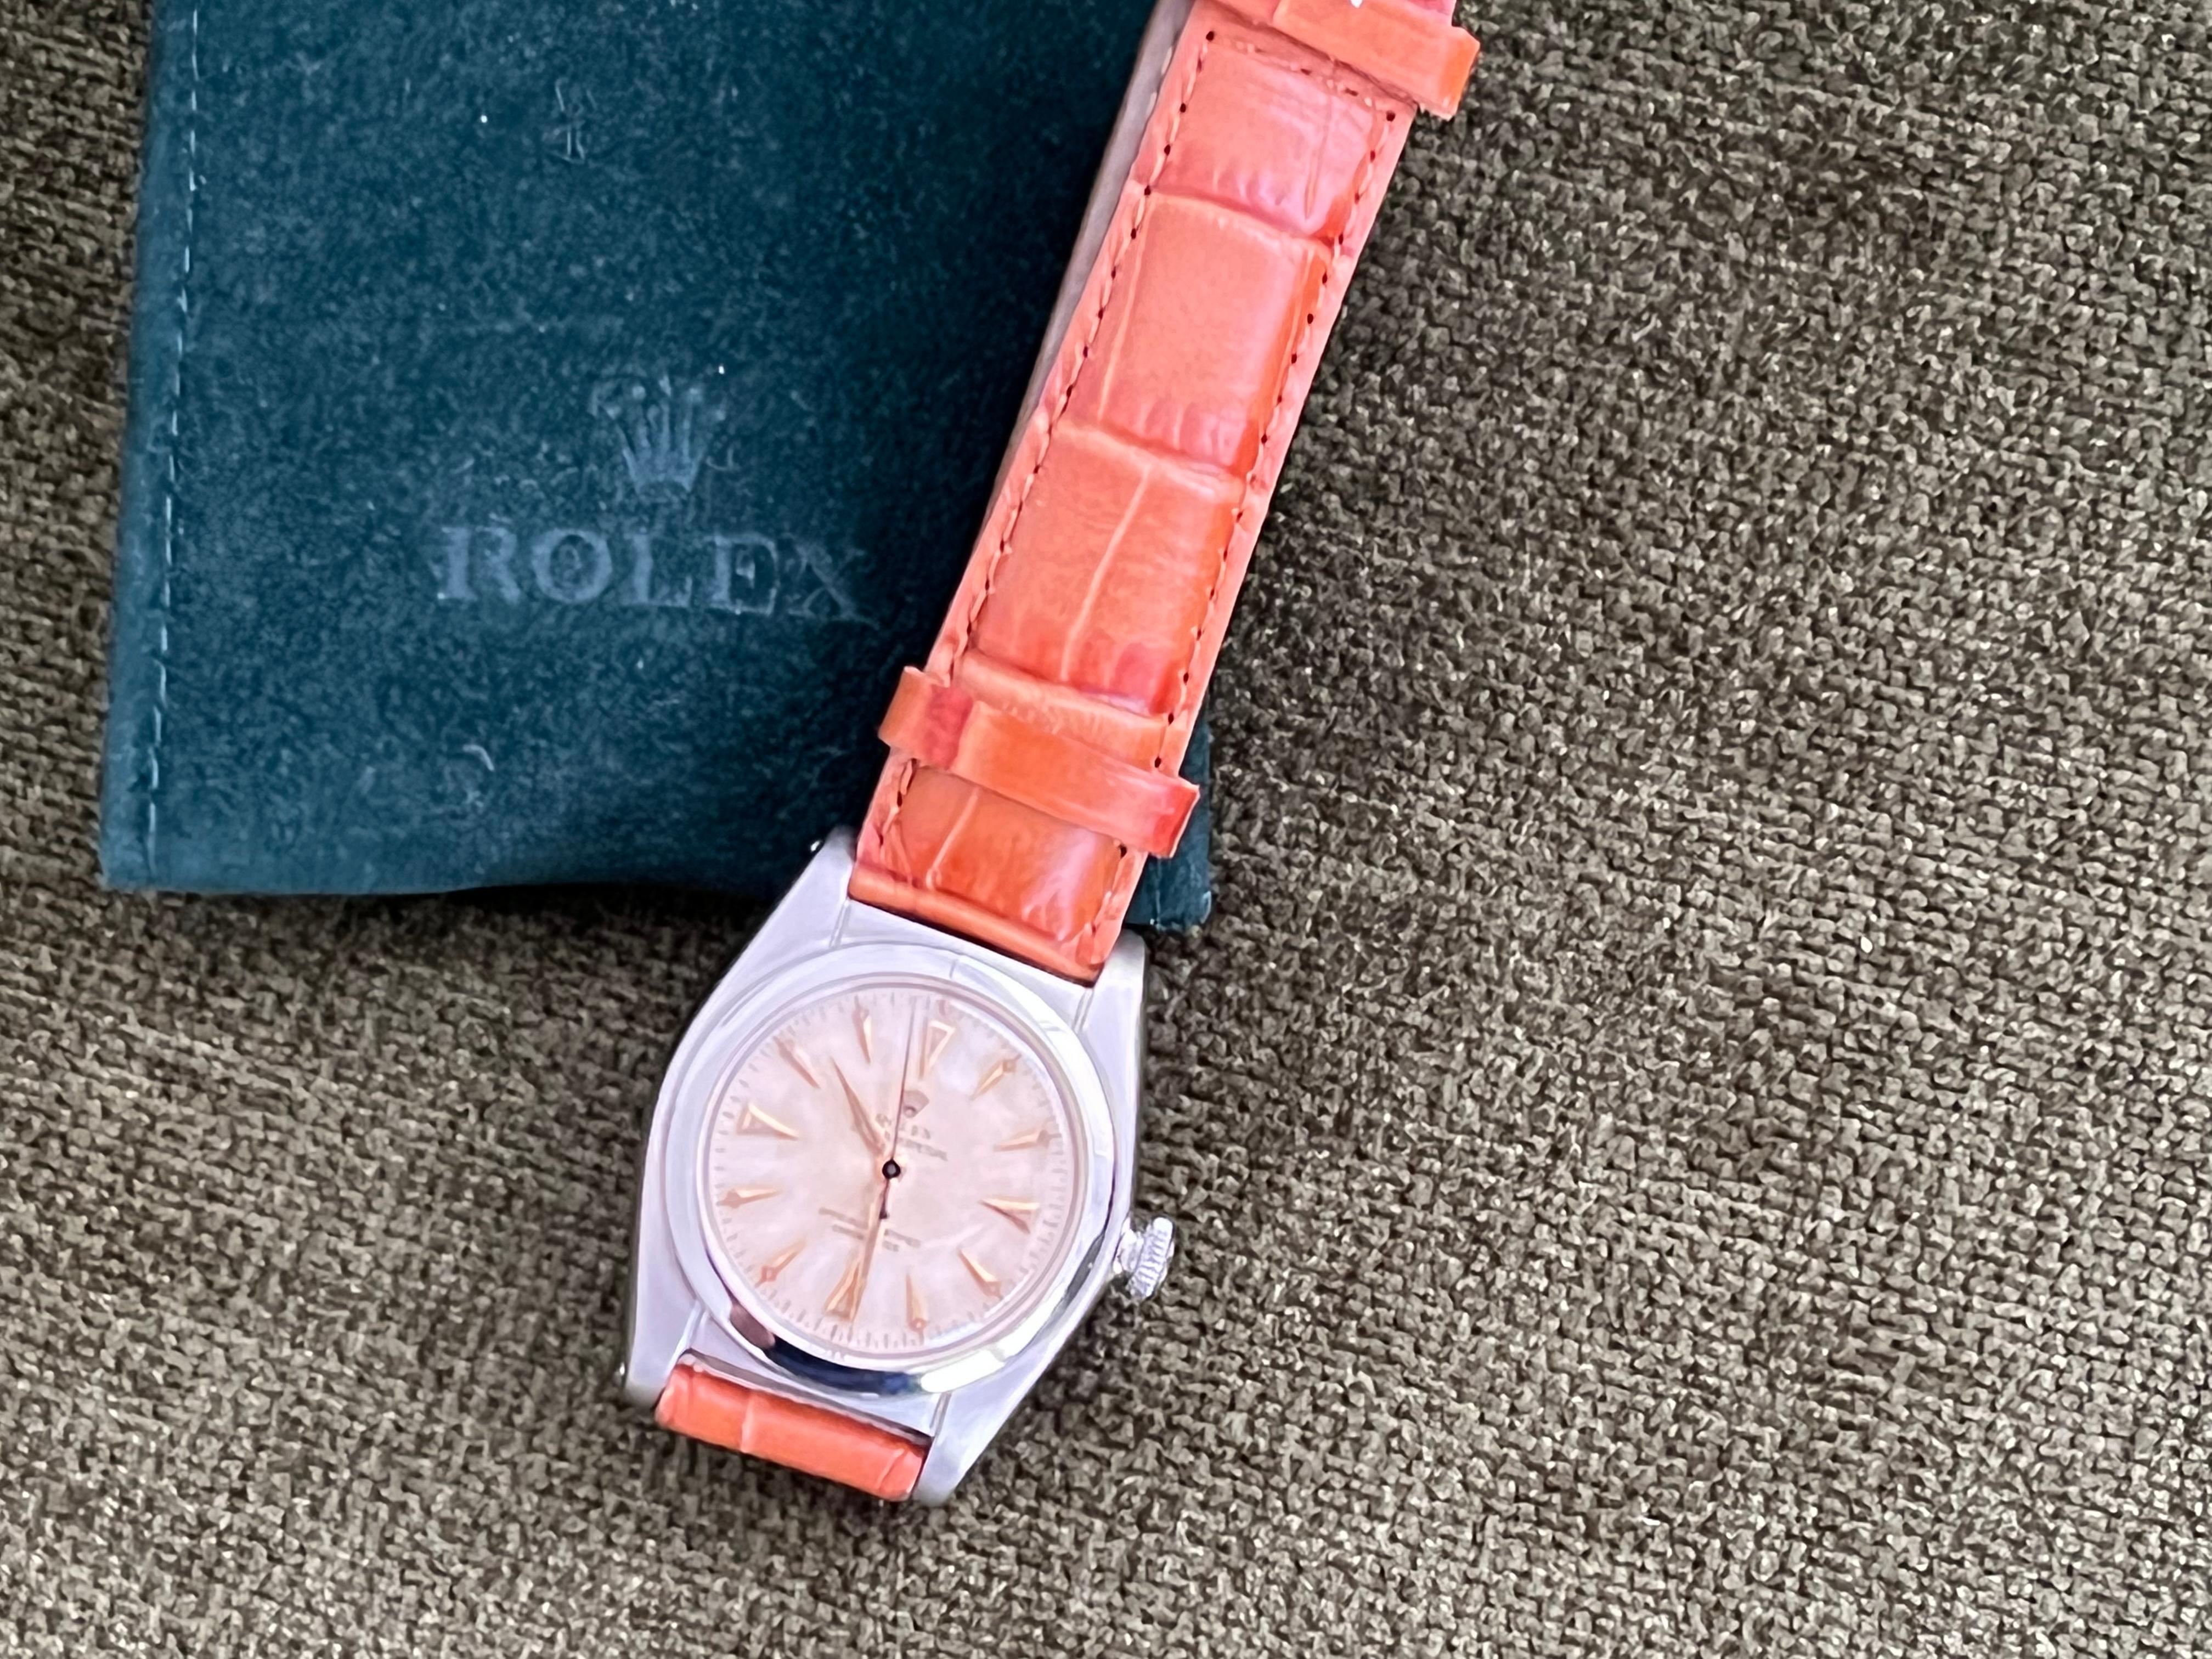 Exciting and rare!! Vintage Rolex bubble back a Reference 6084 Oyster Perpetual dates to approximately 1950s , and is loaded to the hilt with all the goodness you could possibly hope for in a mid-century Rolex. It possesses a 'semi-bubbleback' case